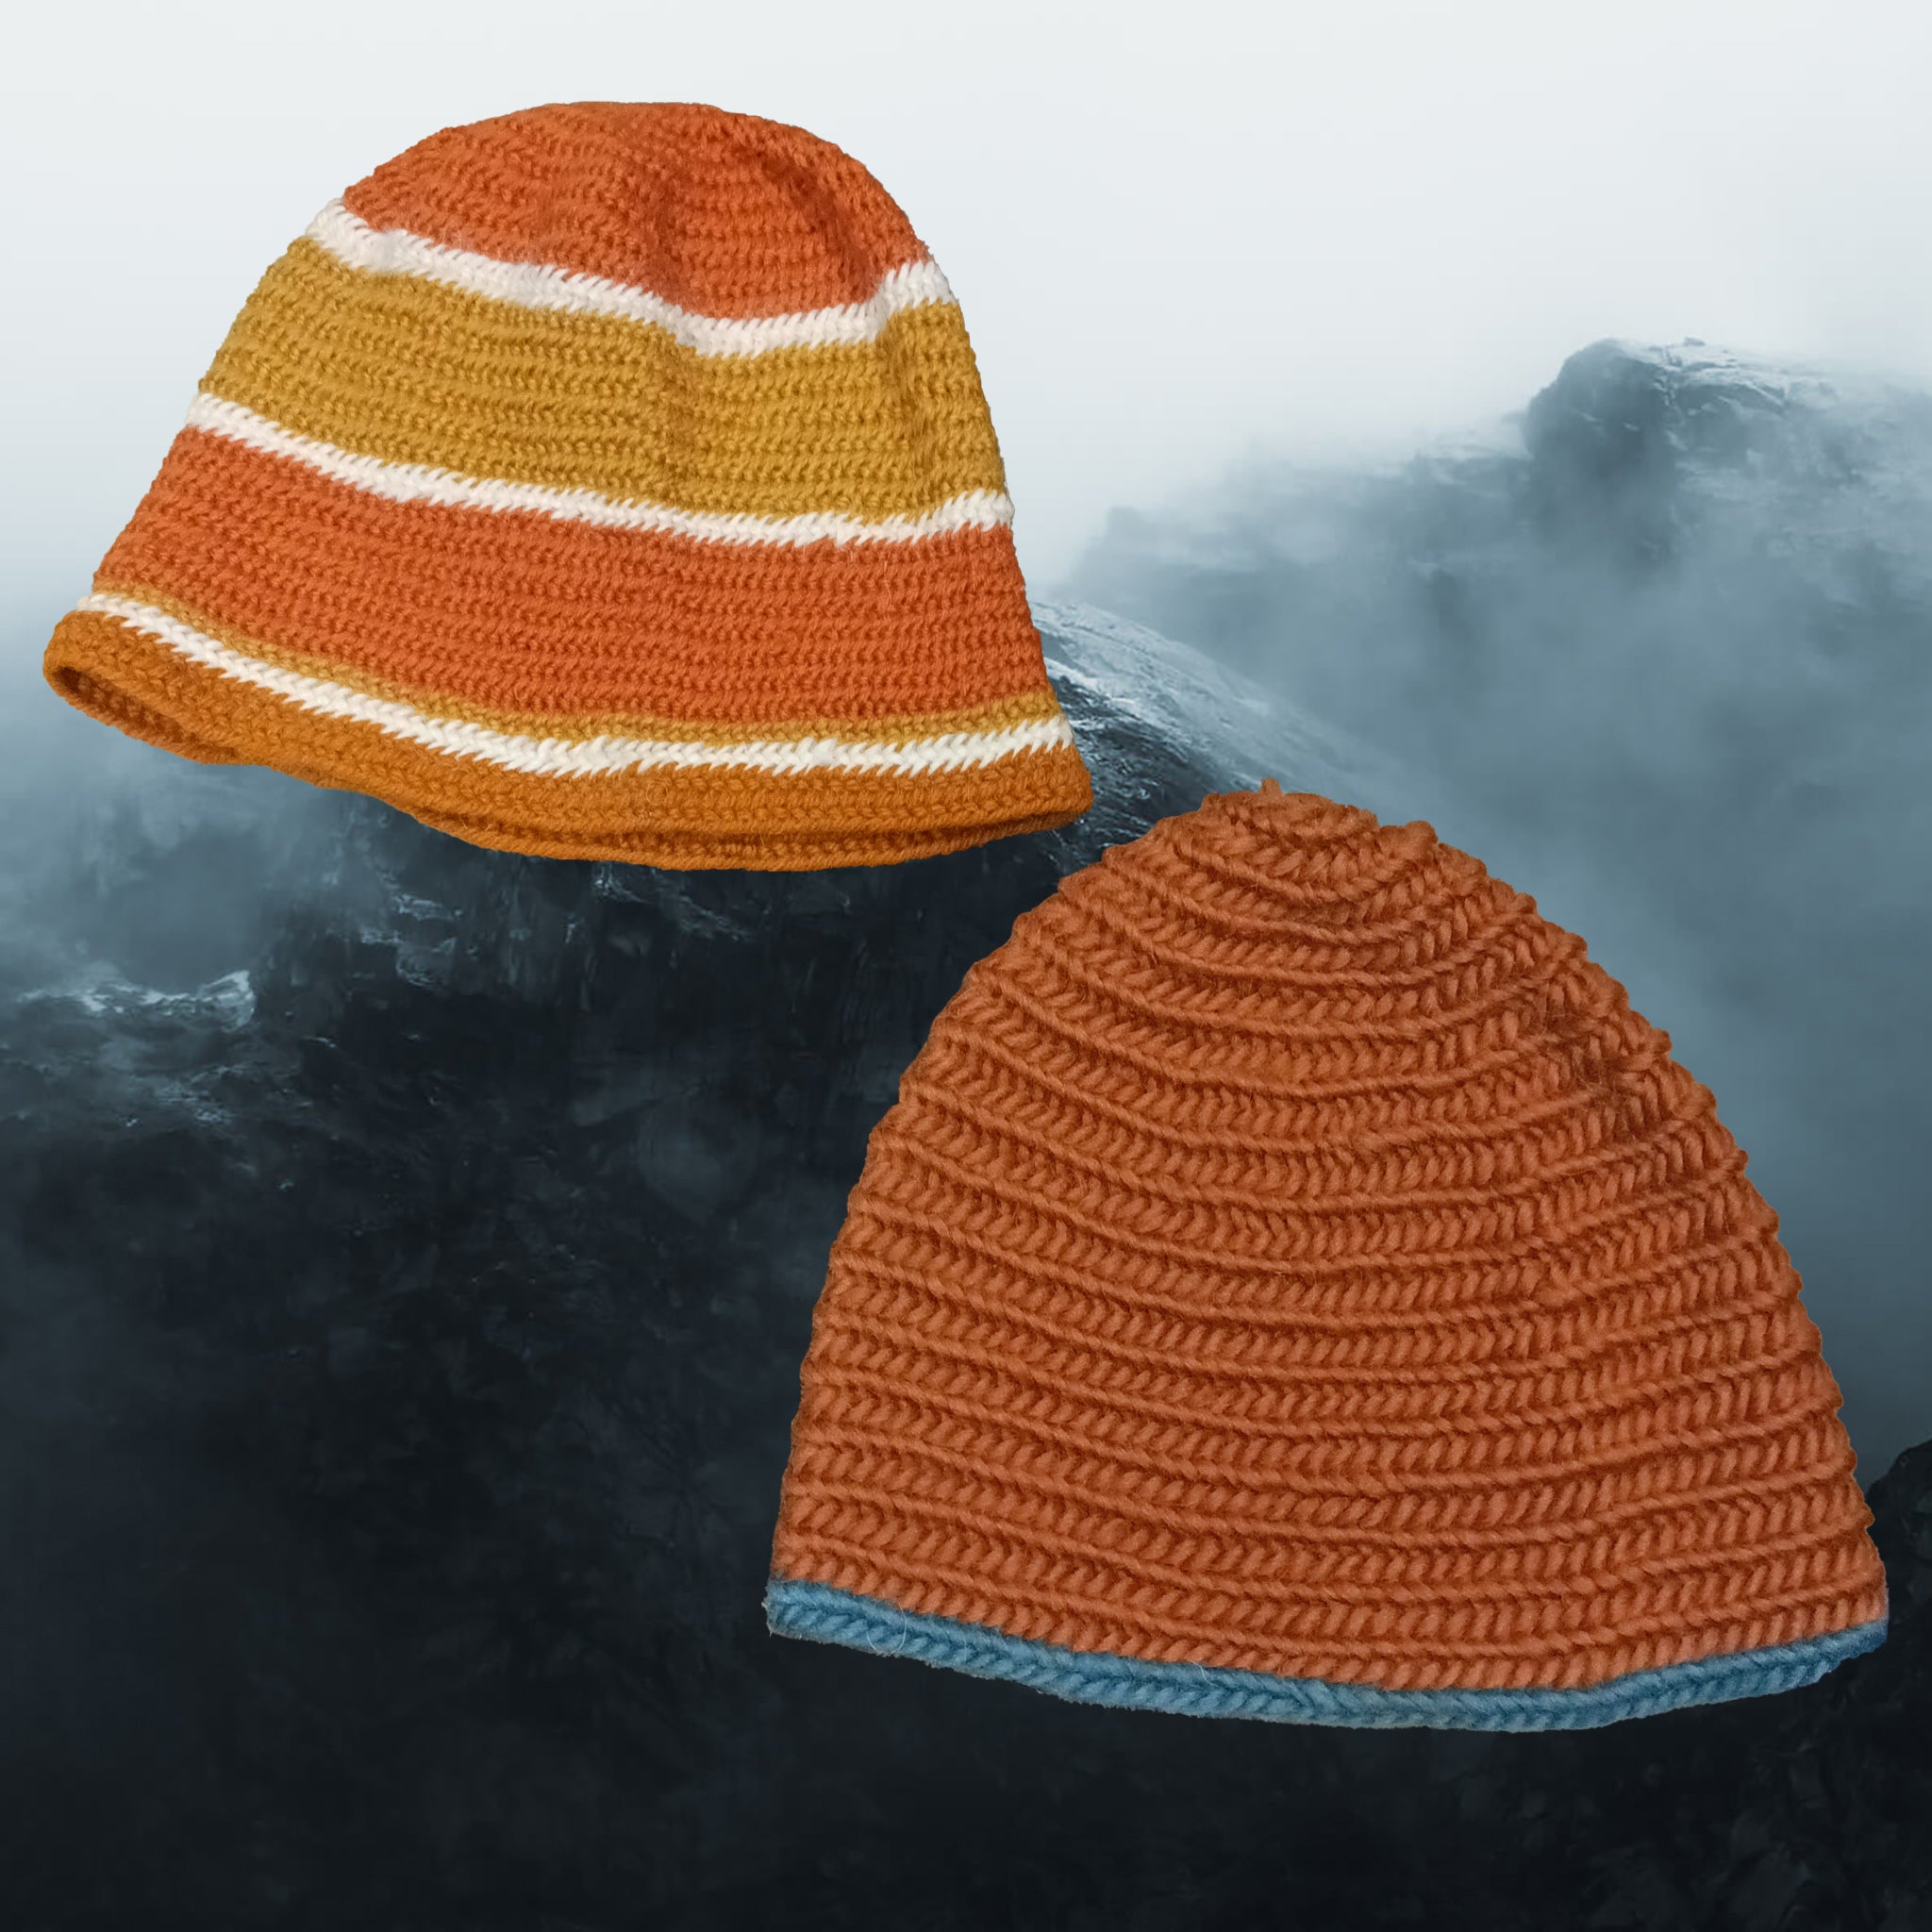 Wool Viking Hats, Hand-Woven Using Ancient Nalbinding Techniques